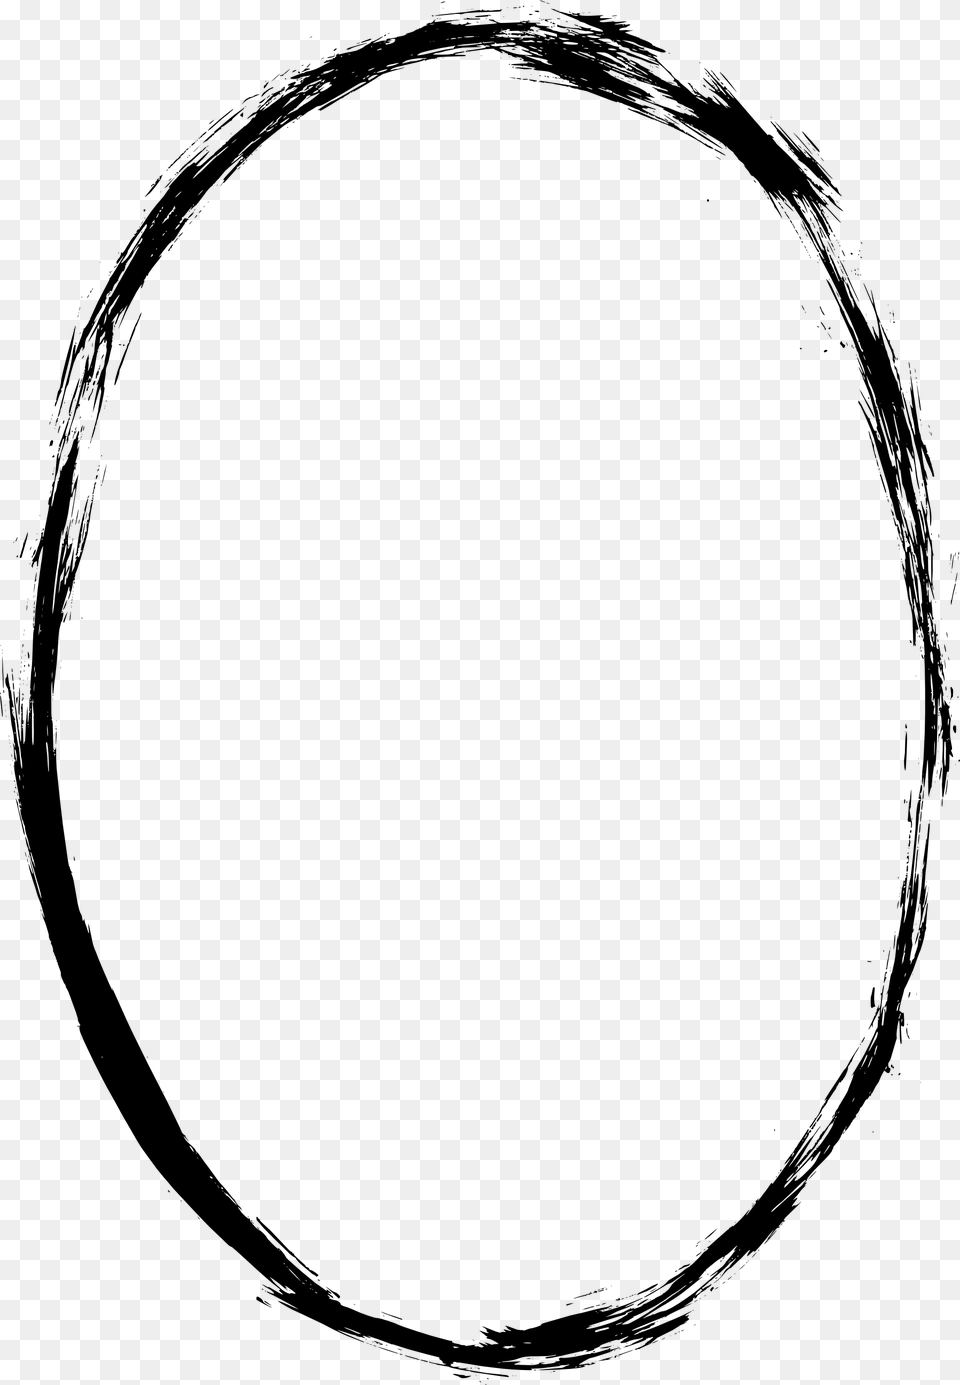 Oval Outline Clip Art At Clker Com Circle, Smoke Pipe Free Png Download